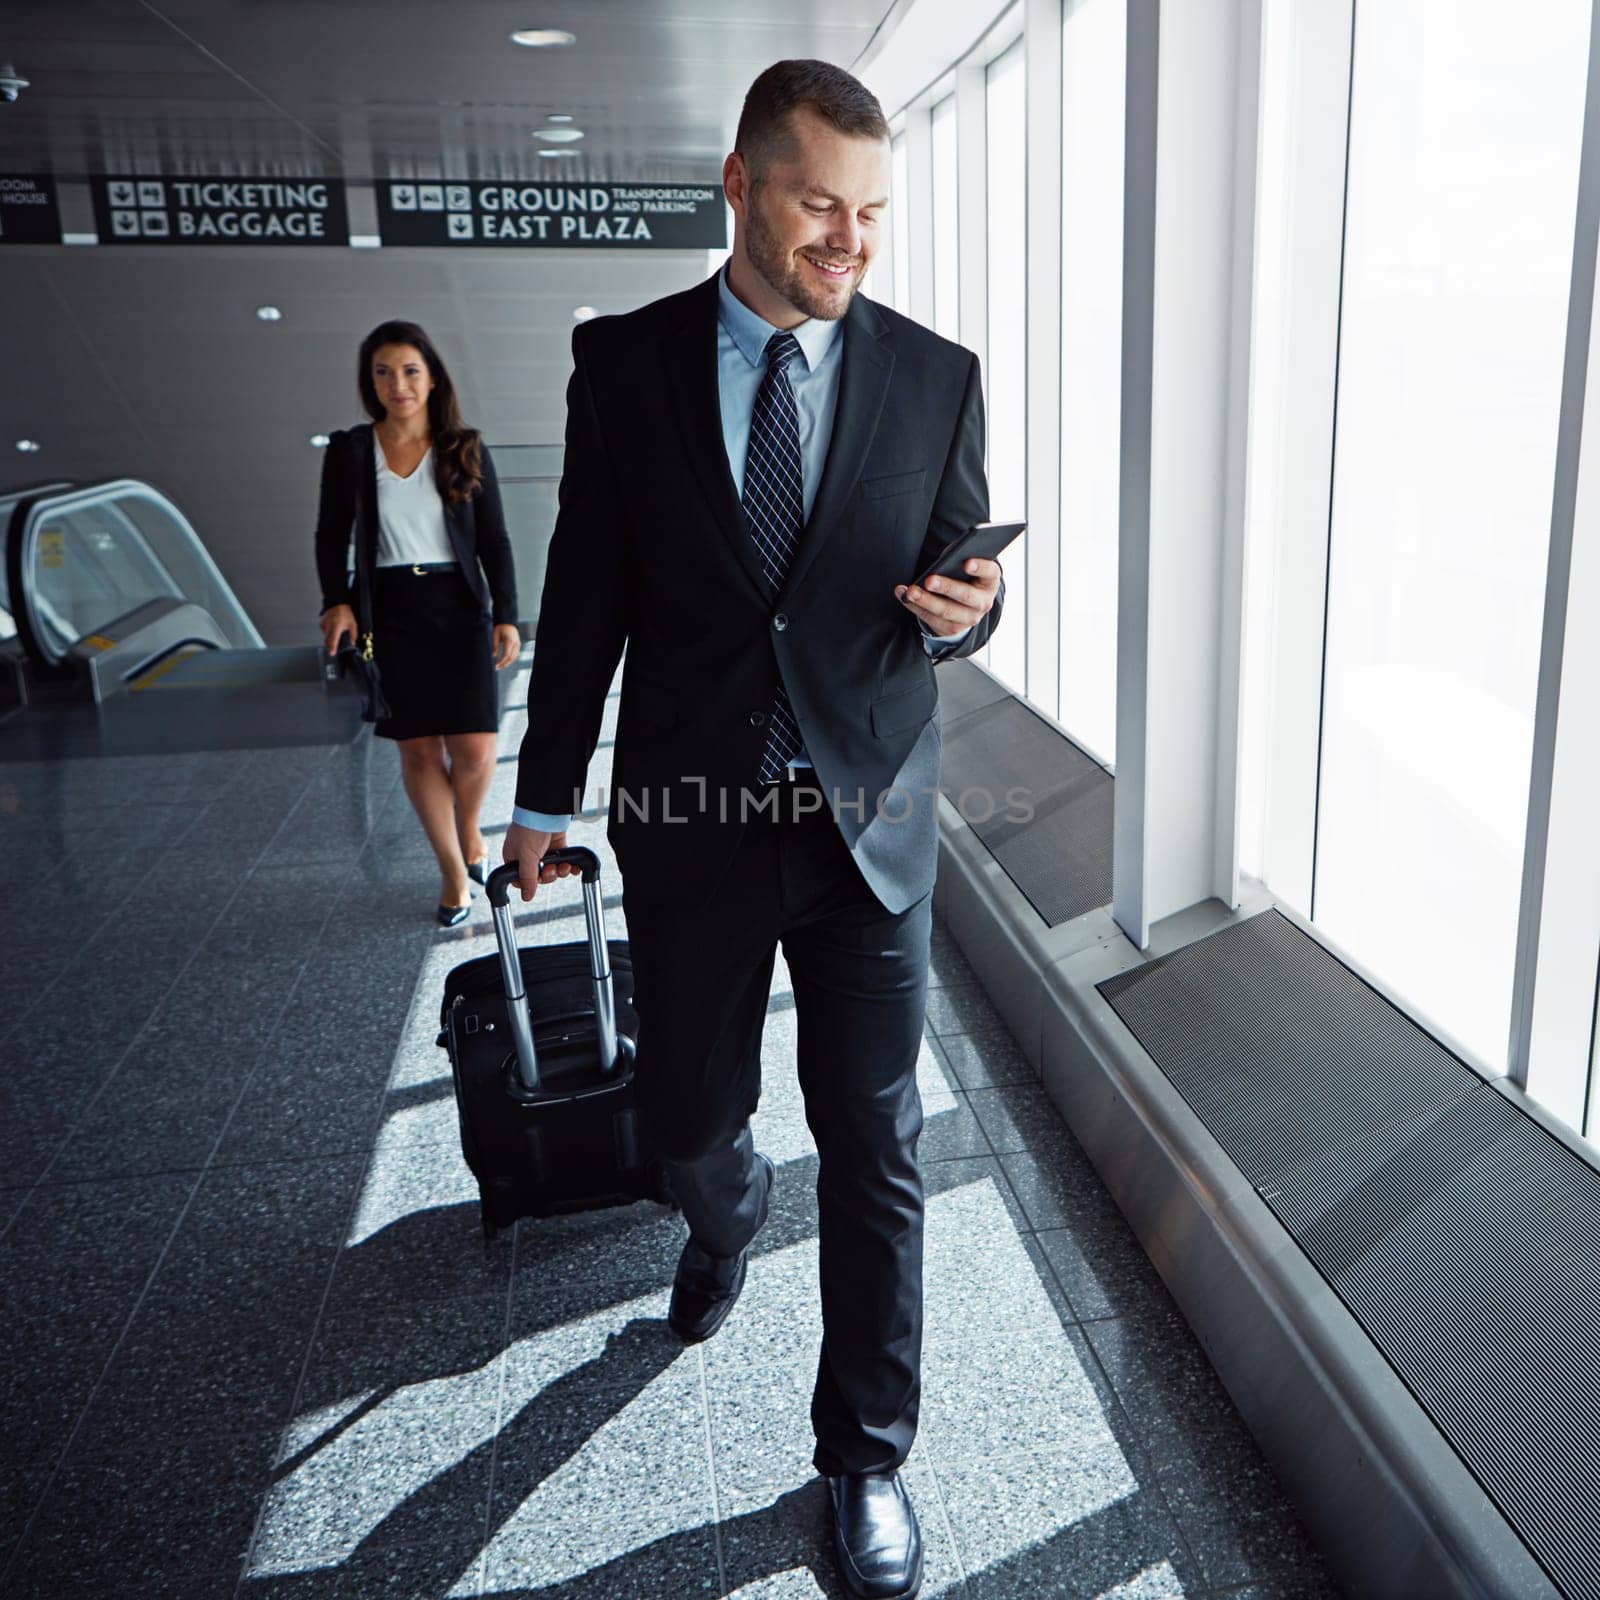 Now he can be online, anytime. two executive businesspeople walking through an airport during a business trip. by YuriArcurs